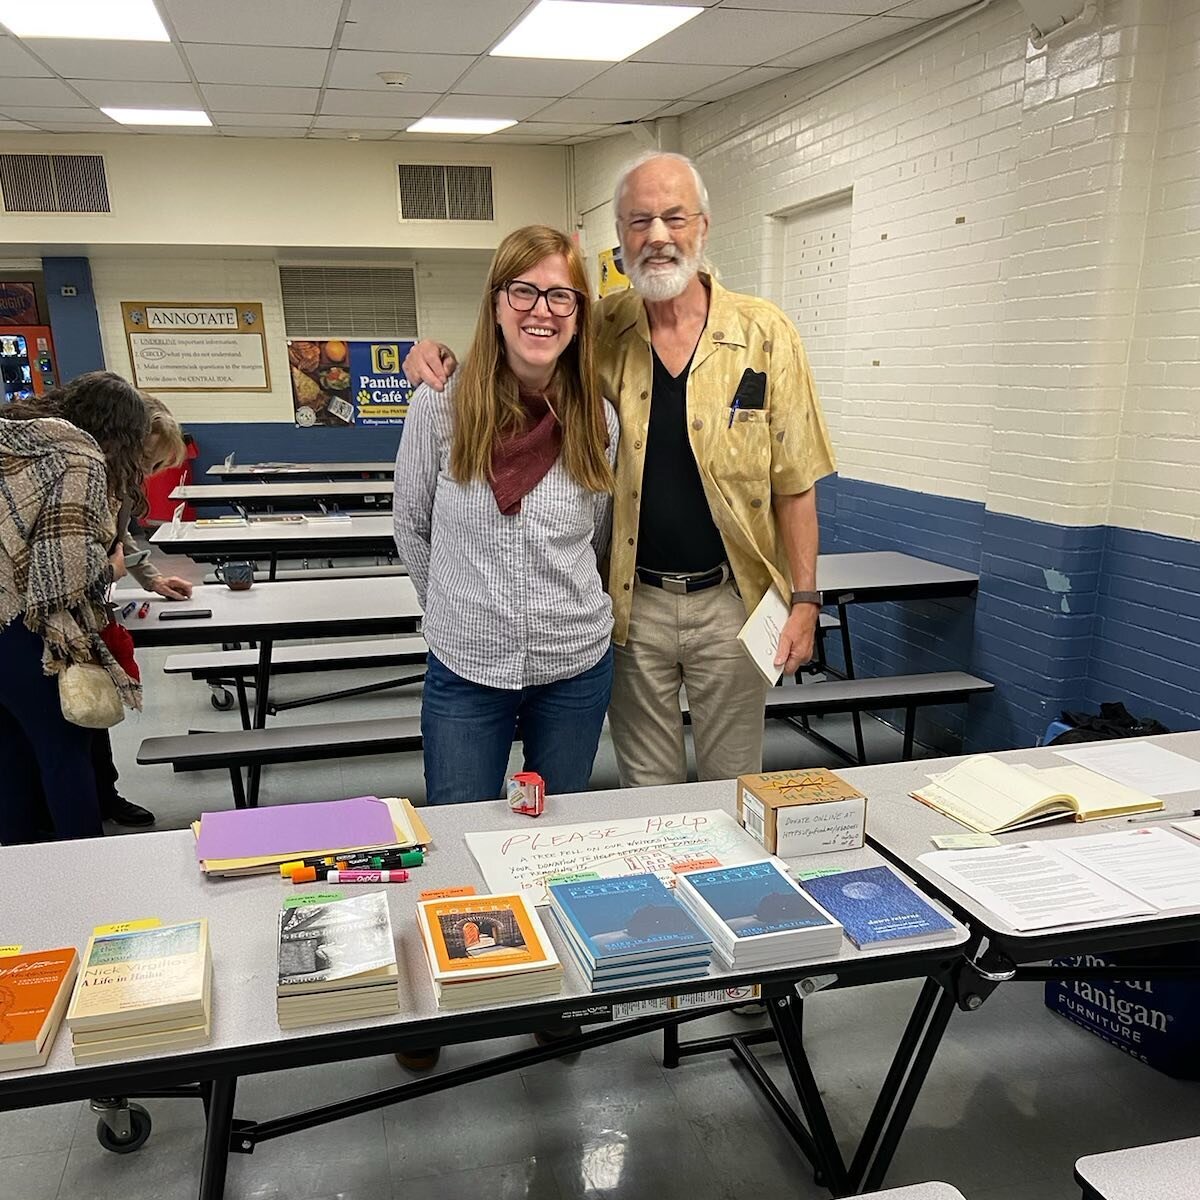 Come on down to the Collingswood book festival, which is being held in the Collingswood high school due to the weather today. We have plenty of books available and will be writing haiku together!